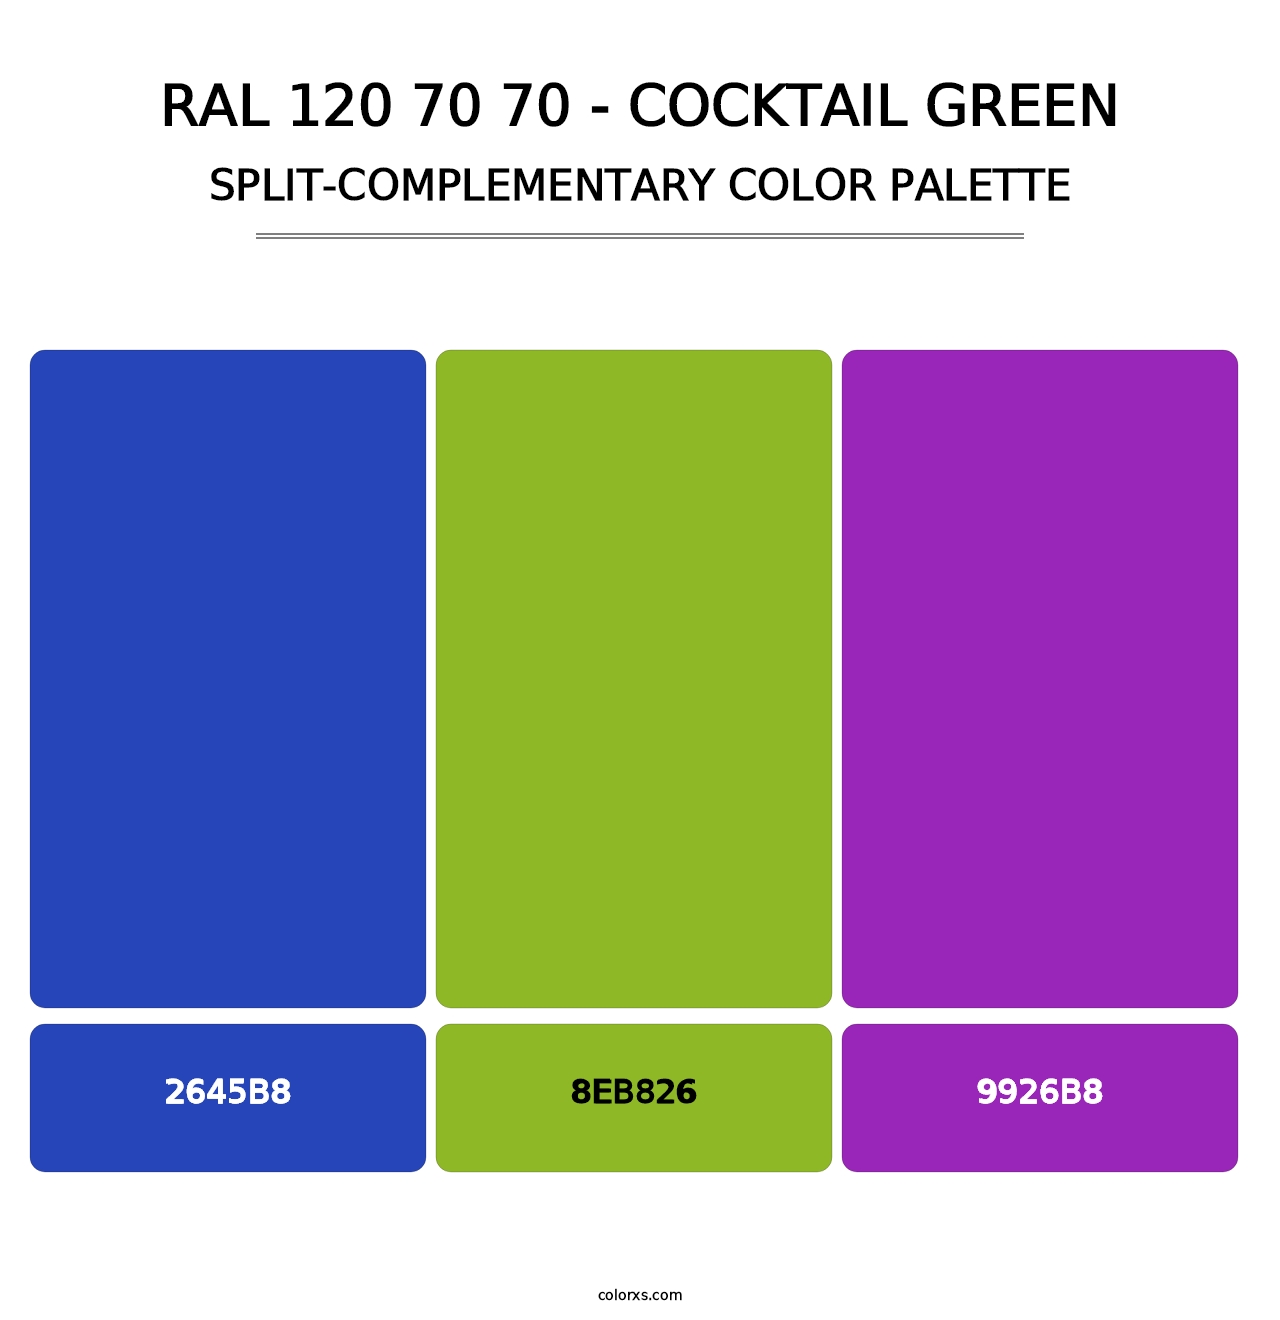 RAL 120 70 70 - Cocktail Green - Split-Complementary Color Palette